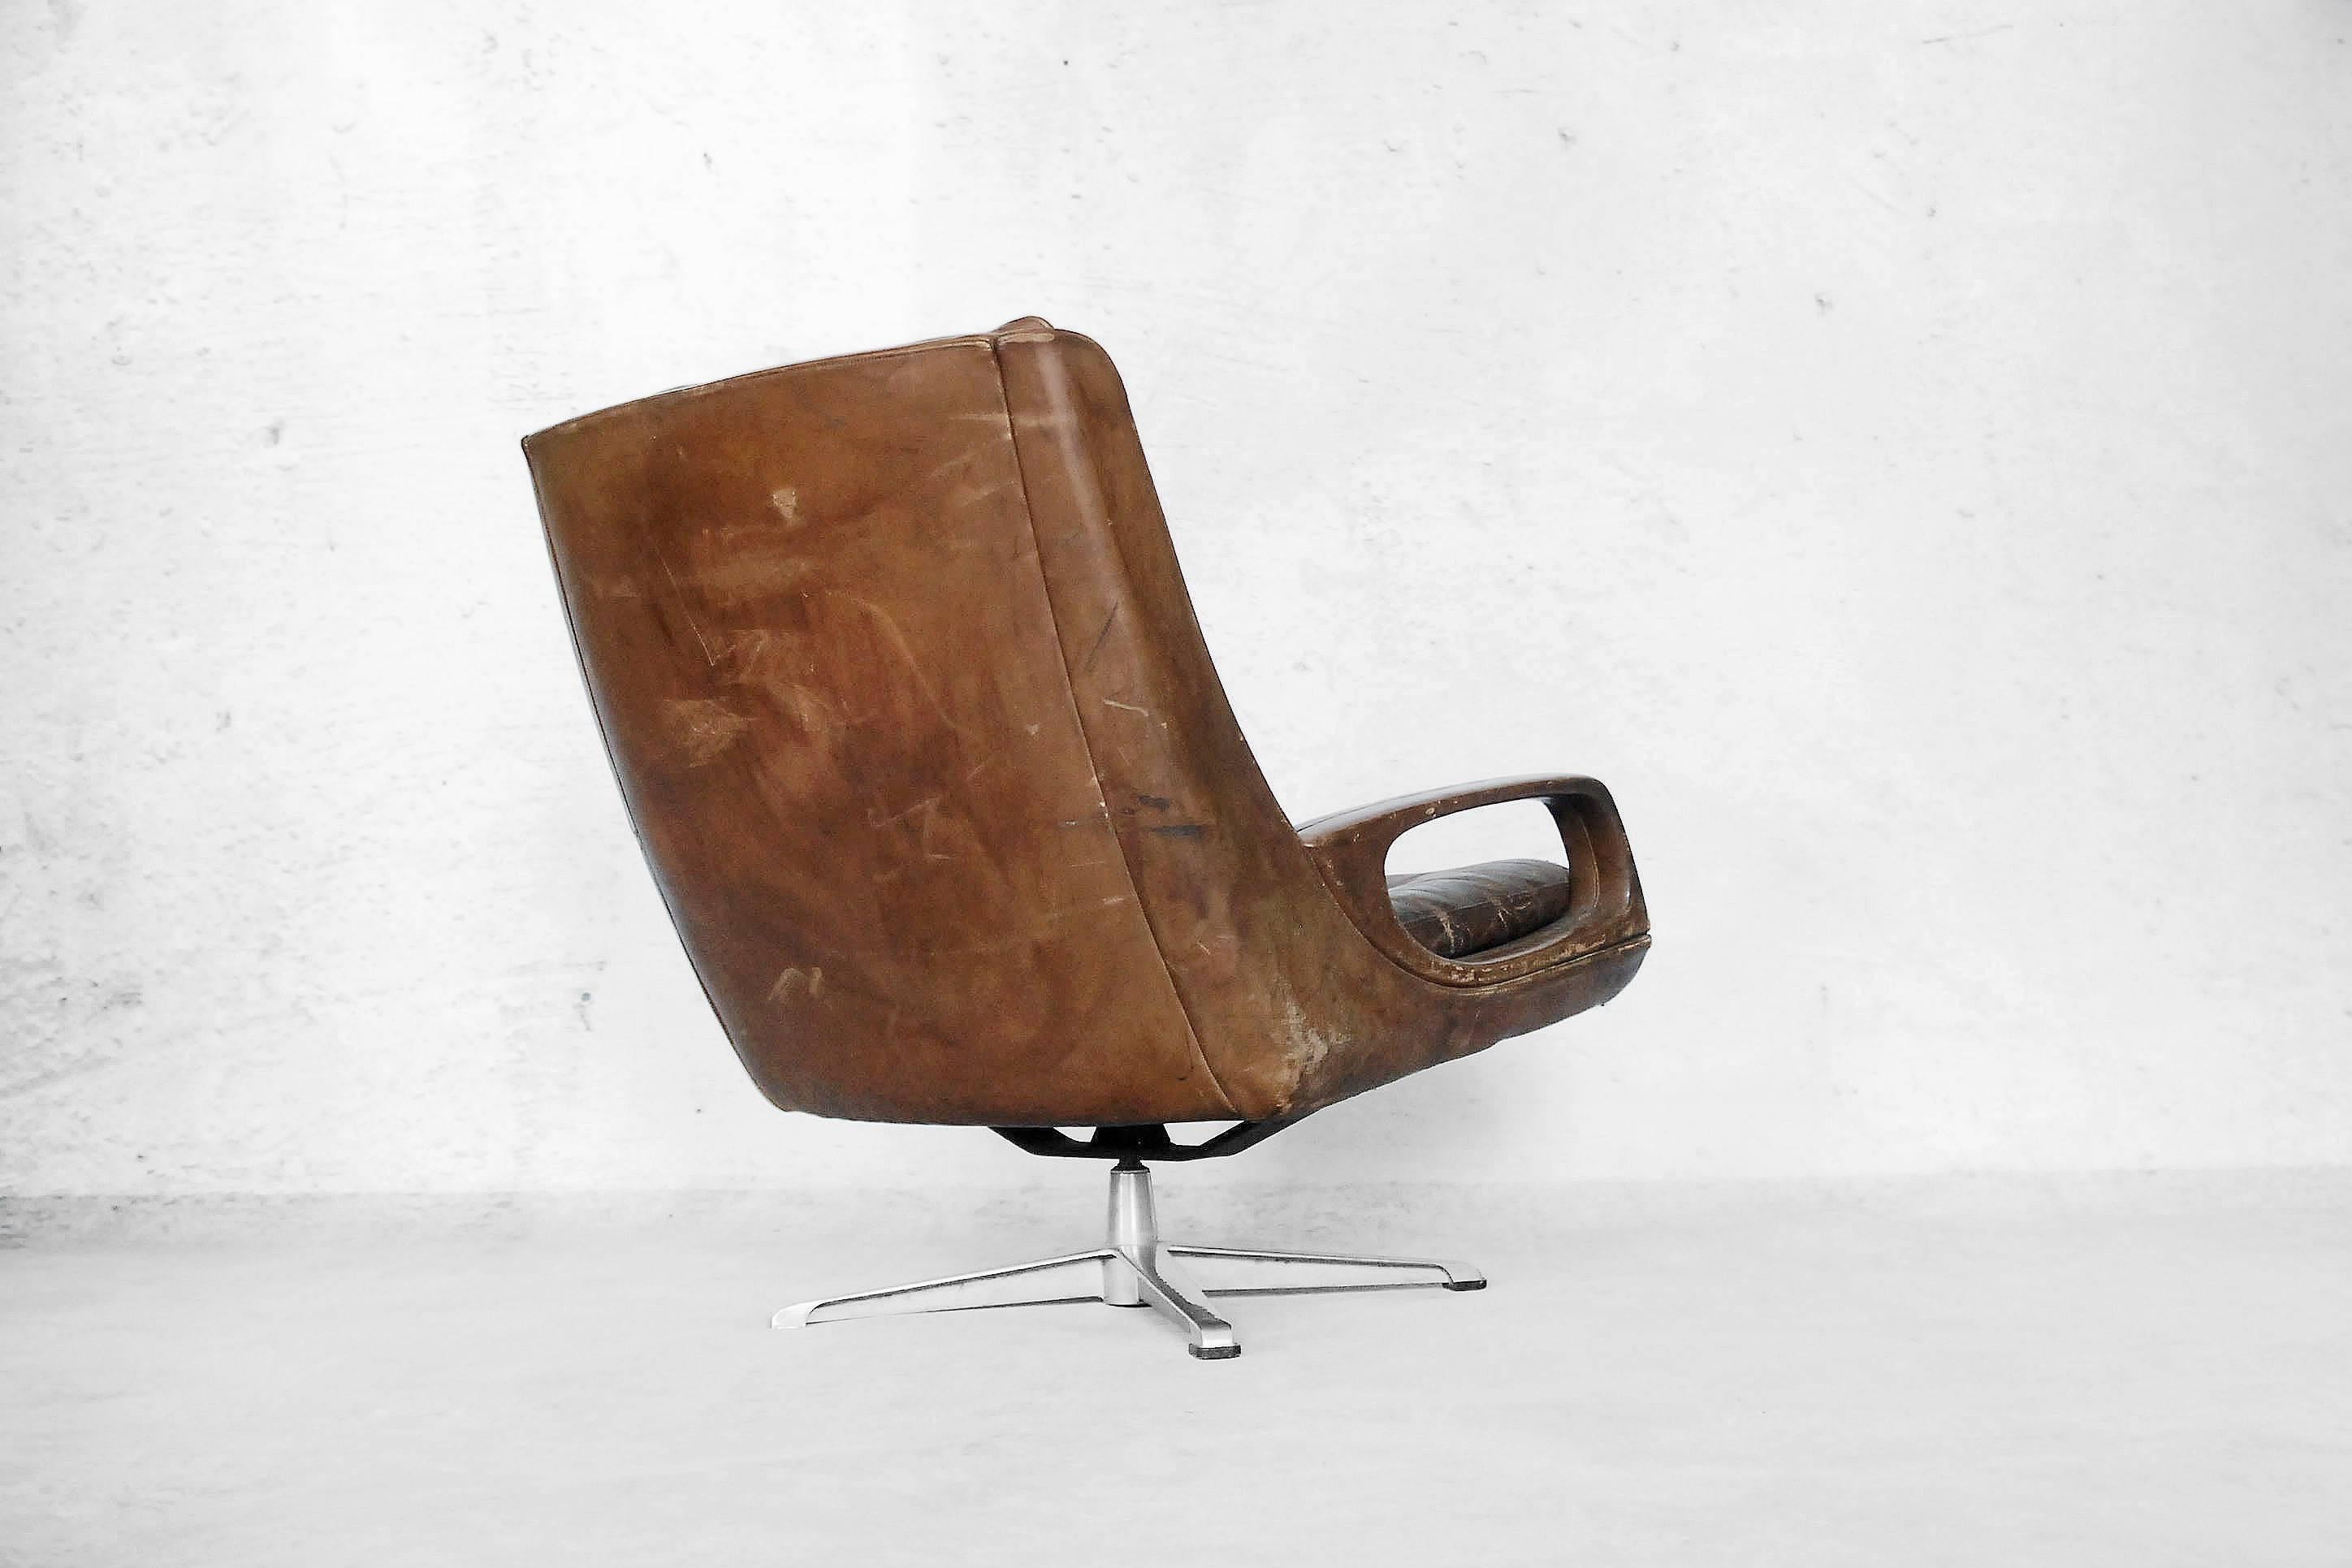 German Swivel Leather Lounge Chair by Carl Straub, 1950s For Sale